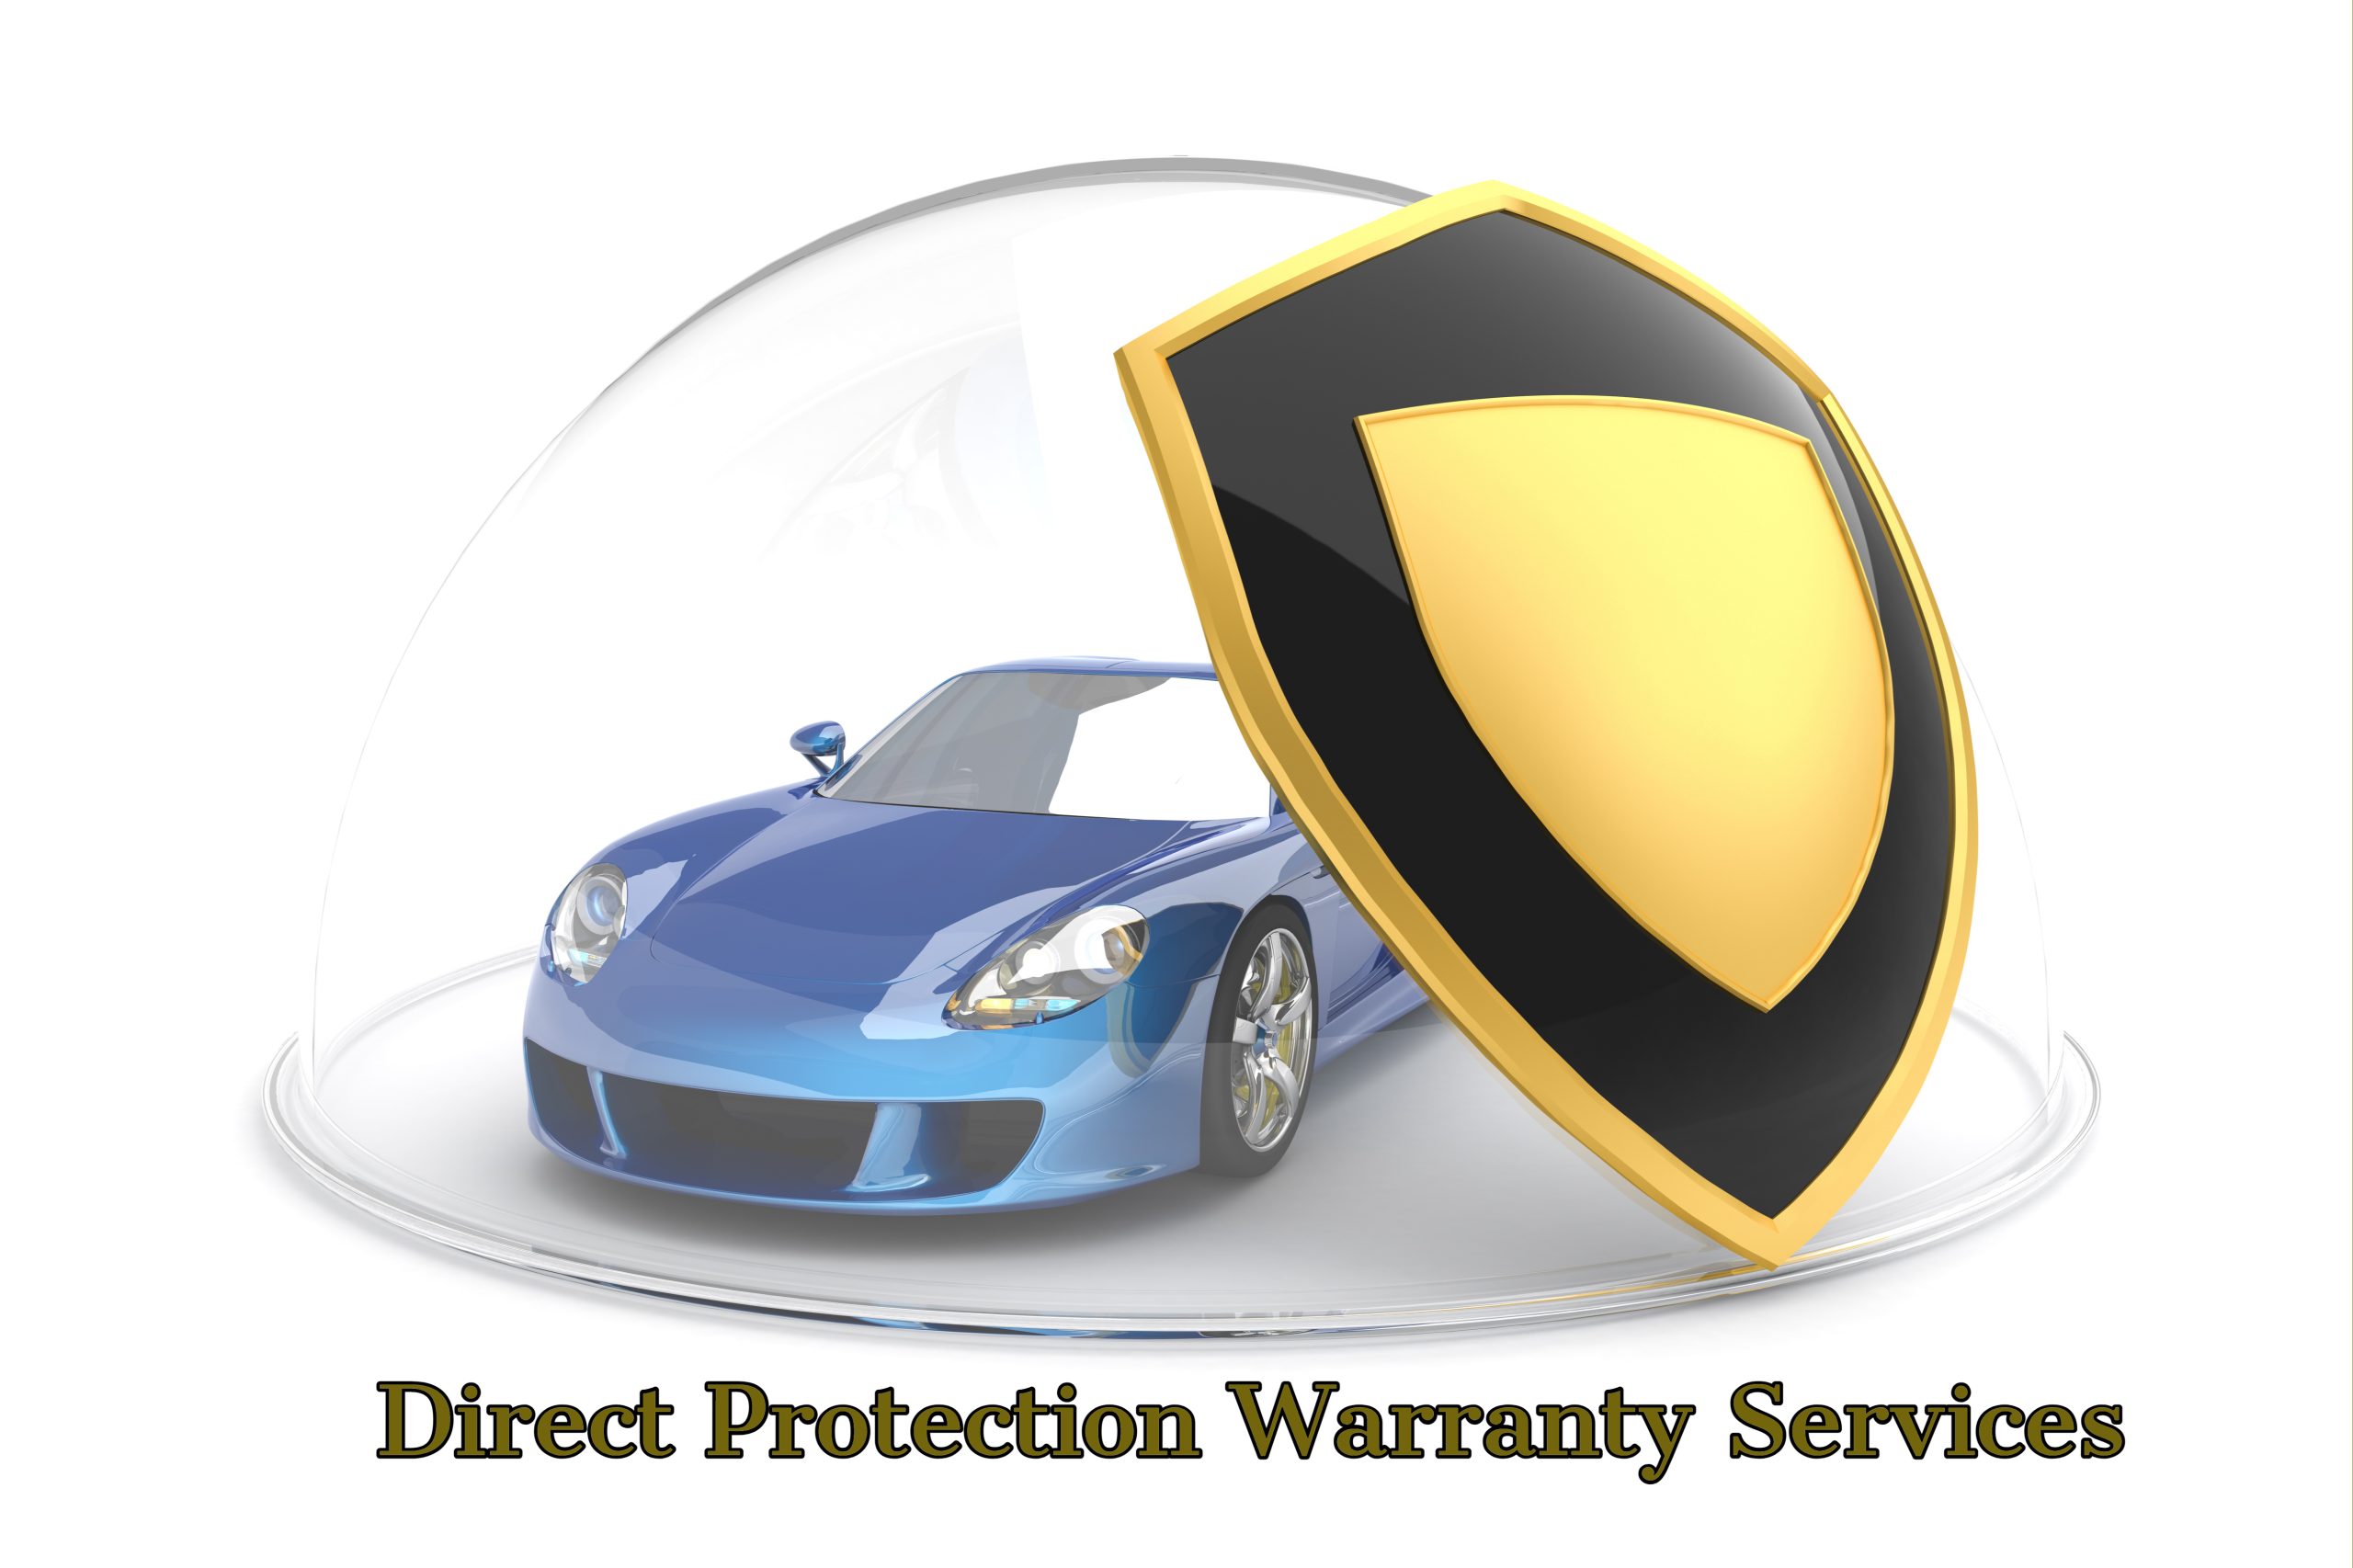 Direct Protection Warranty Services